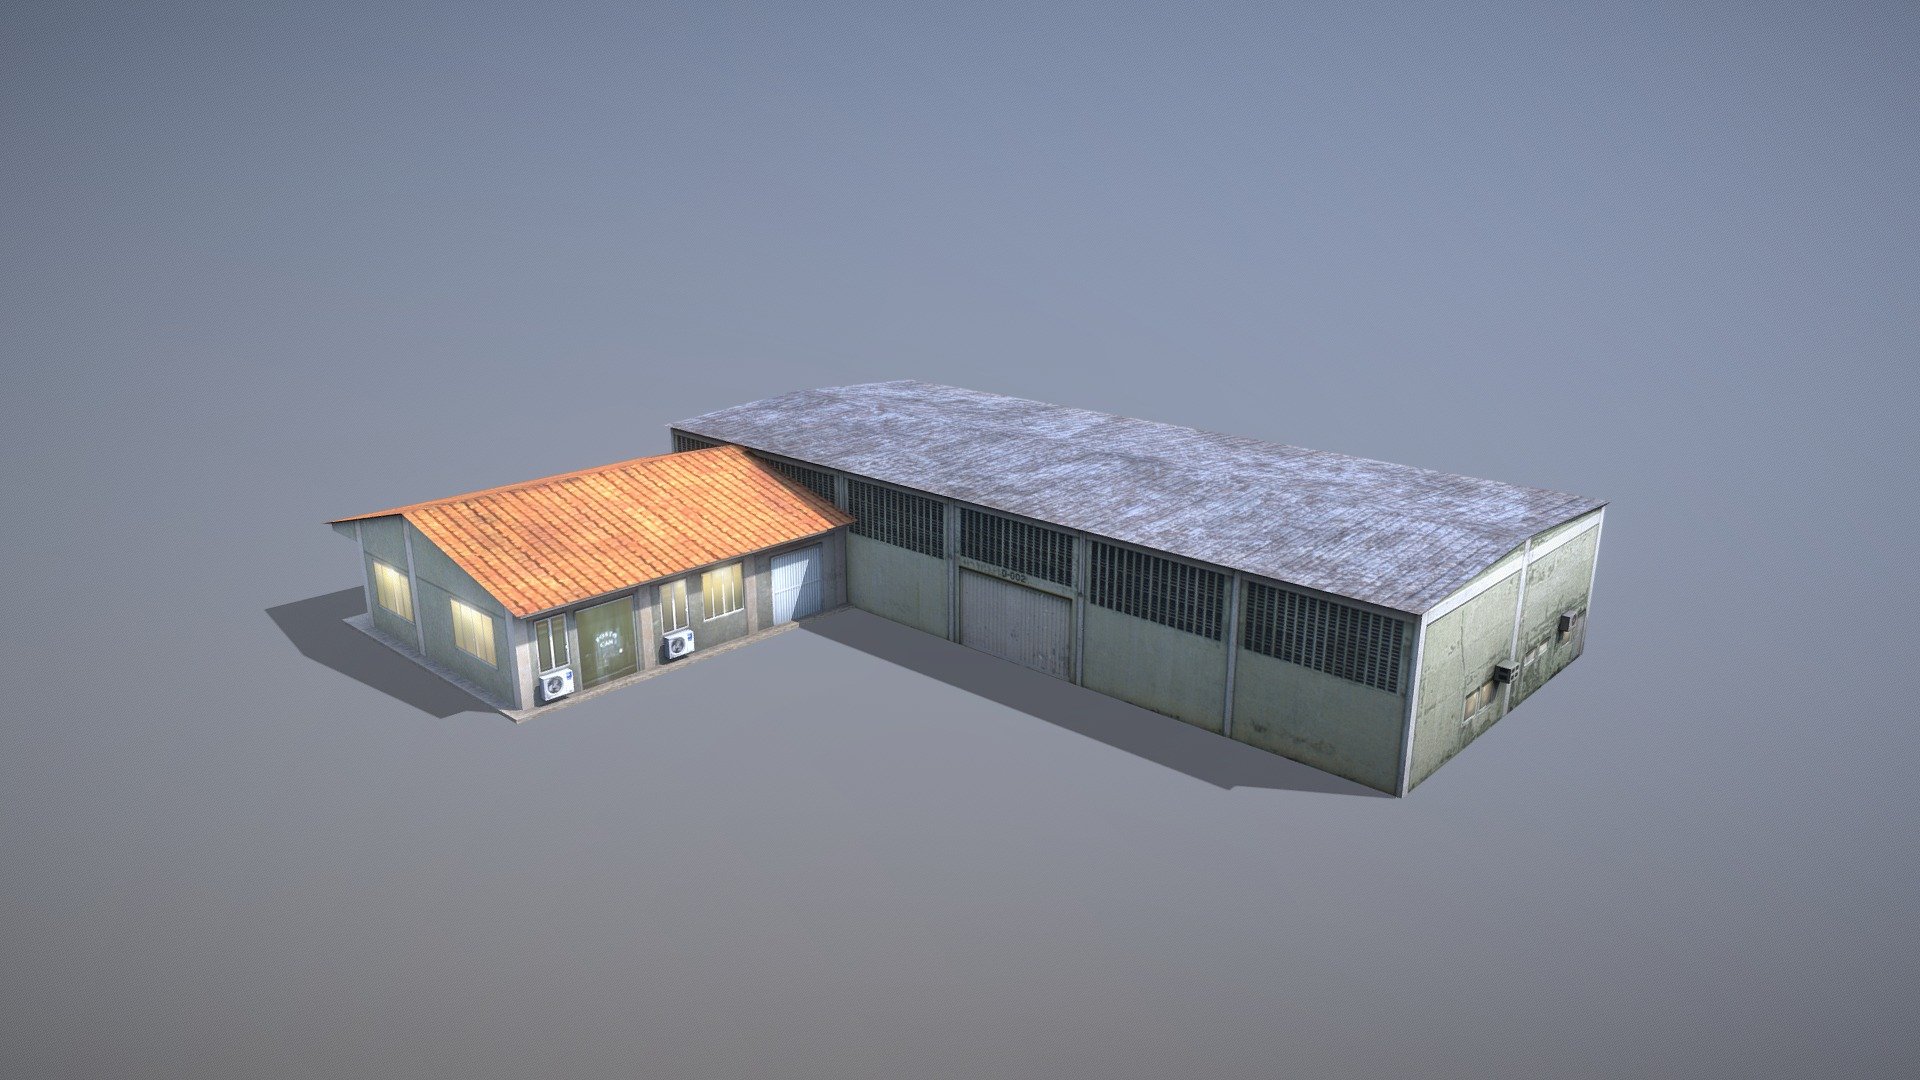 MilitaryBase_PortoVelho_Storage_02

LOD0 - (triangles 139) / (points 97)
LOD1 - (triangles 49) / (points 53)

Low-poly 3D model Airport Storage with LODs


Textures for PBR shader (Albedo, AmbietOcclusion, Gloss, Specular, NormalMap, Emission(night)) they may be used with Unity3D, Unreal Engine. 
All pictures (previews) REALTIME rendering
Textures for NIGHT

Сontains 2 LODs



Textures:


_Storage_01_Albedo.png            - 1024x1024
_Storage_01_AmbietOcclusion.png   - 1024x1024
_Storage_01_Gloss.png         - 1024x1024
_Storage_01_Specular.png      - 1024x1024
_Storage_01_NormalMap.png     - 1024x1024 
_Storage_01_Emission.png      - 1024x1024
+
_Storage_02_Albedo.png            - 512x512
_Storage_02_AmbietOcclusion.png   - 512x512
_Storage_02_Gloss.png         - 512x512
_Storage_02_Specular.png      - 512x512
_Storage_02_NormalMap.png     - 512x512   
_Storage_02_Emission.png      - 512x512



If you have questions about my models or need any kind of help, feel free to contact me and i'll do my best to help you 3d model